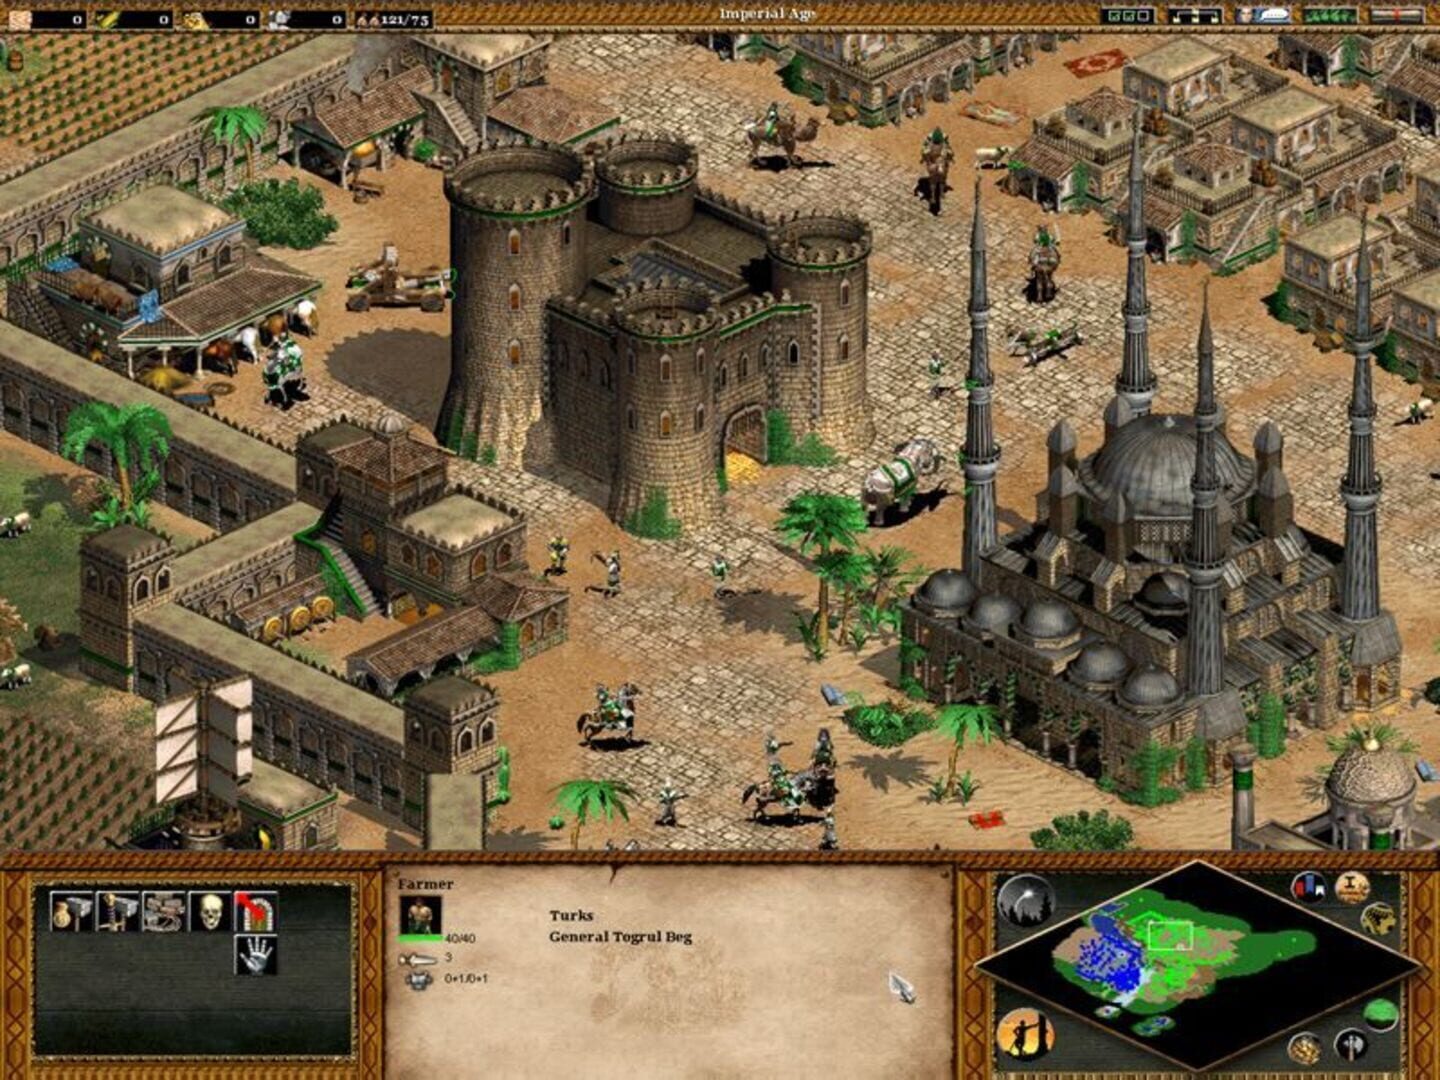 Age of Empires: Collector's Edition